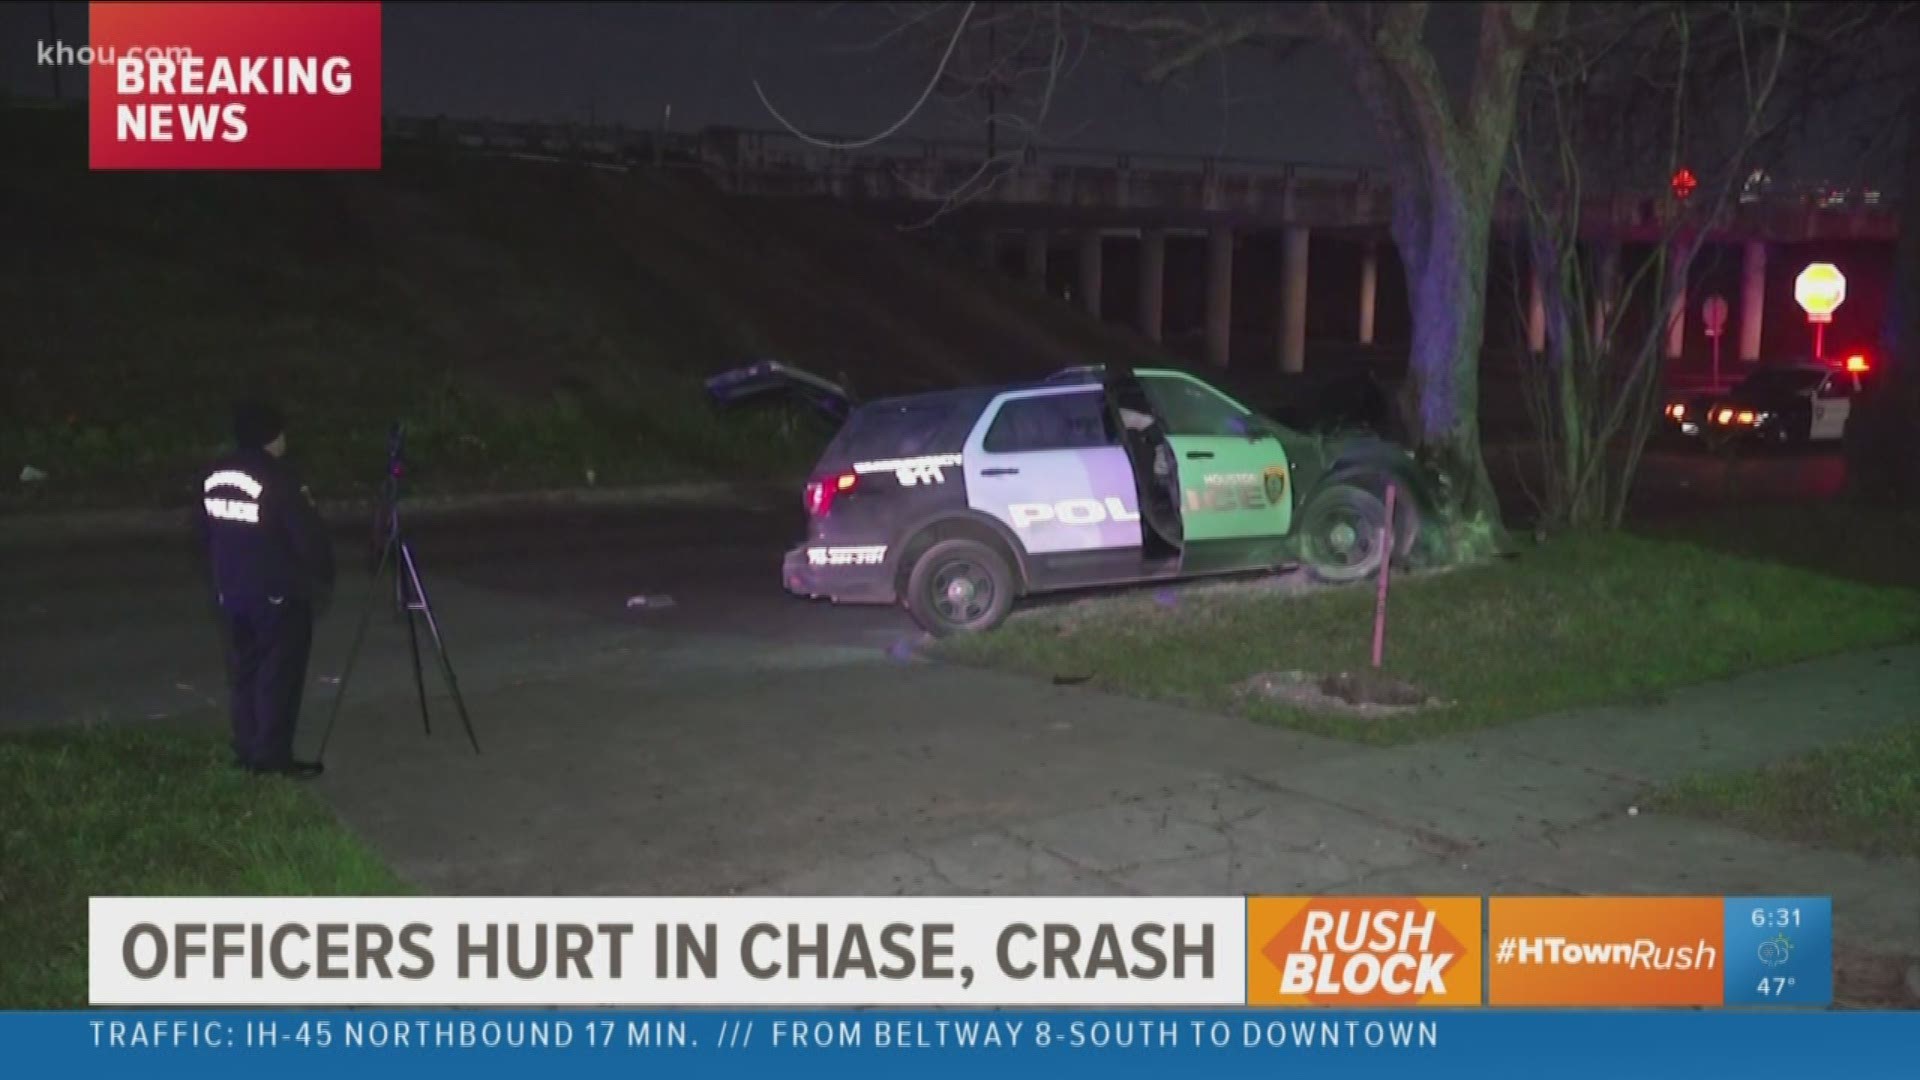 Two Houston police officers were taken to the hospital after an hour-long pursuit in the Third Ward area overnight.